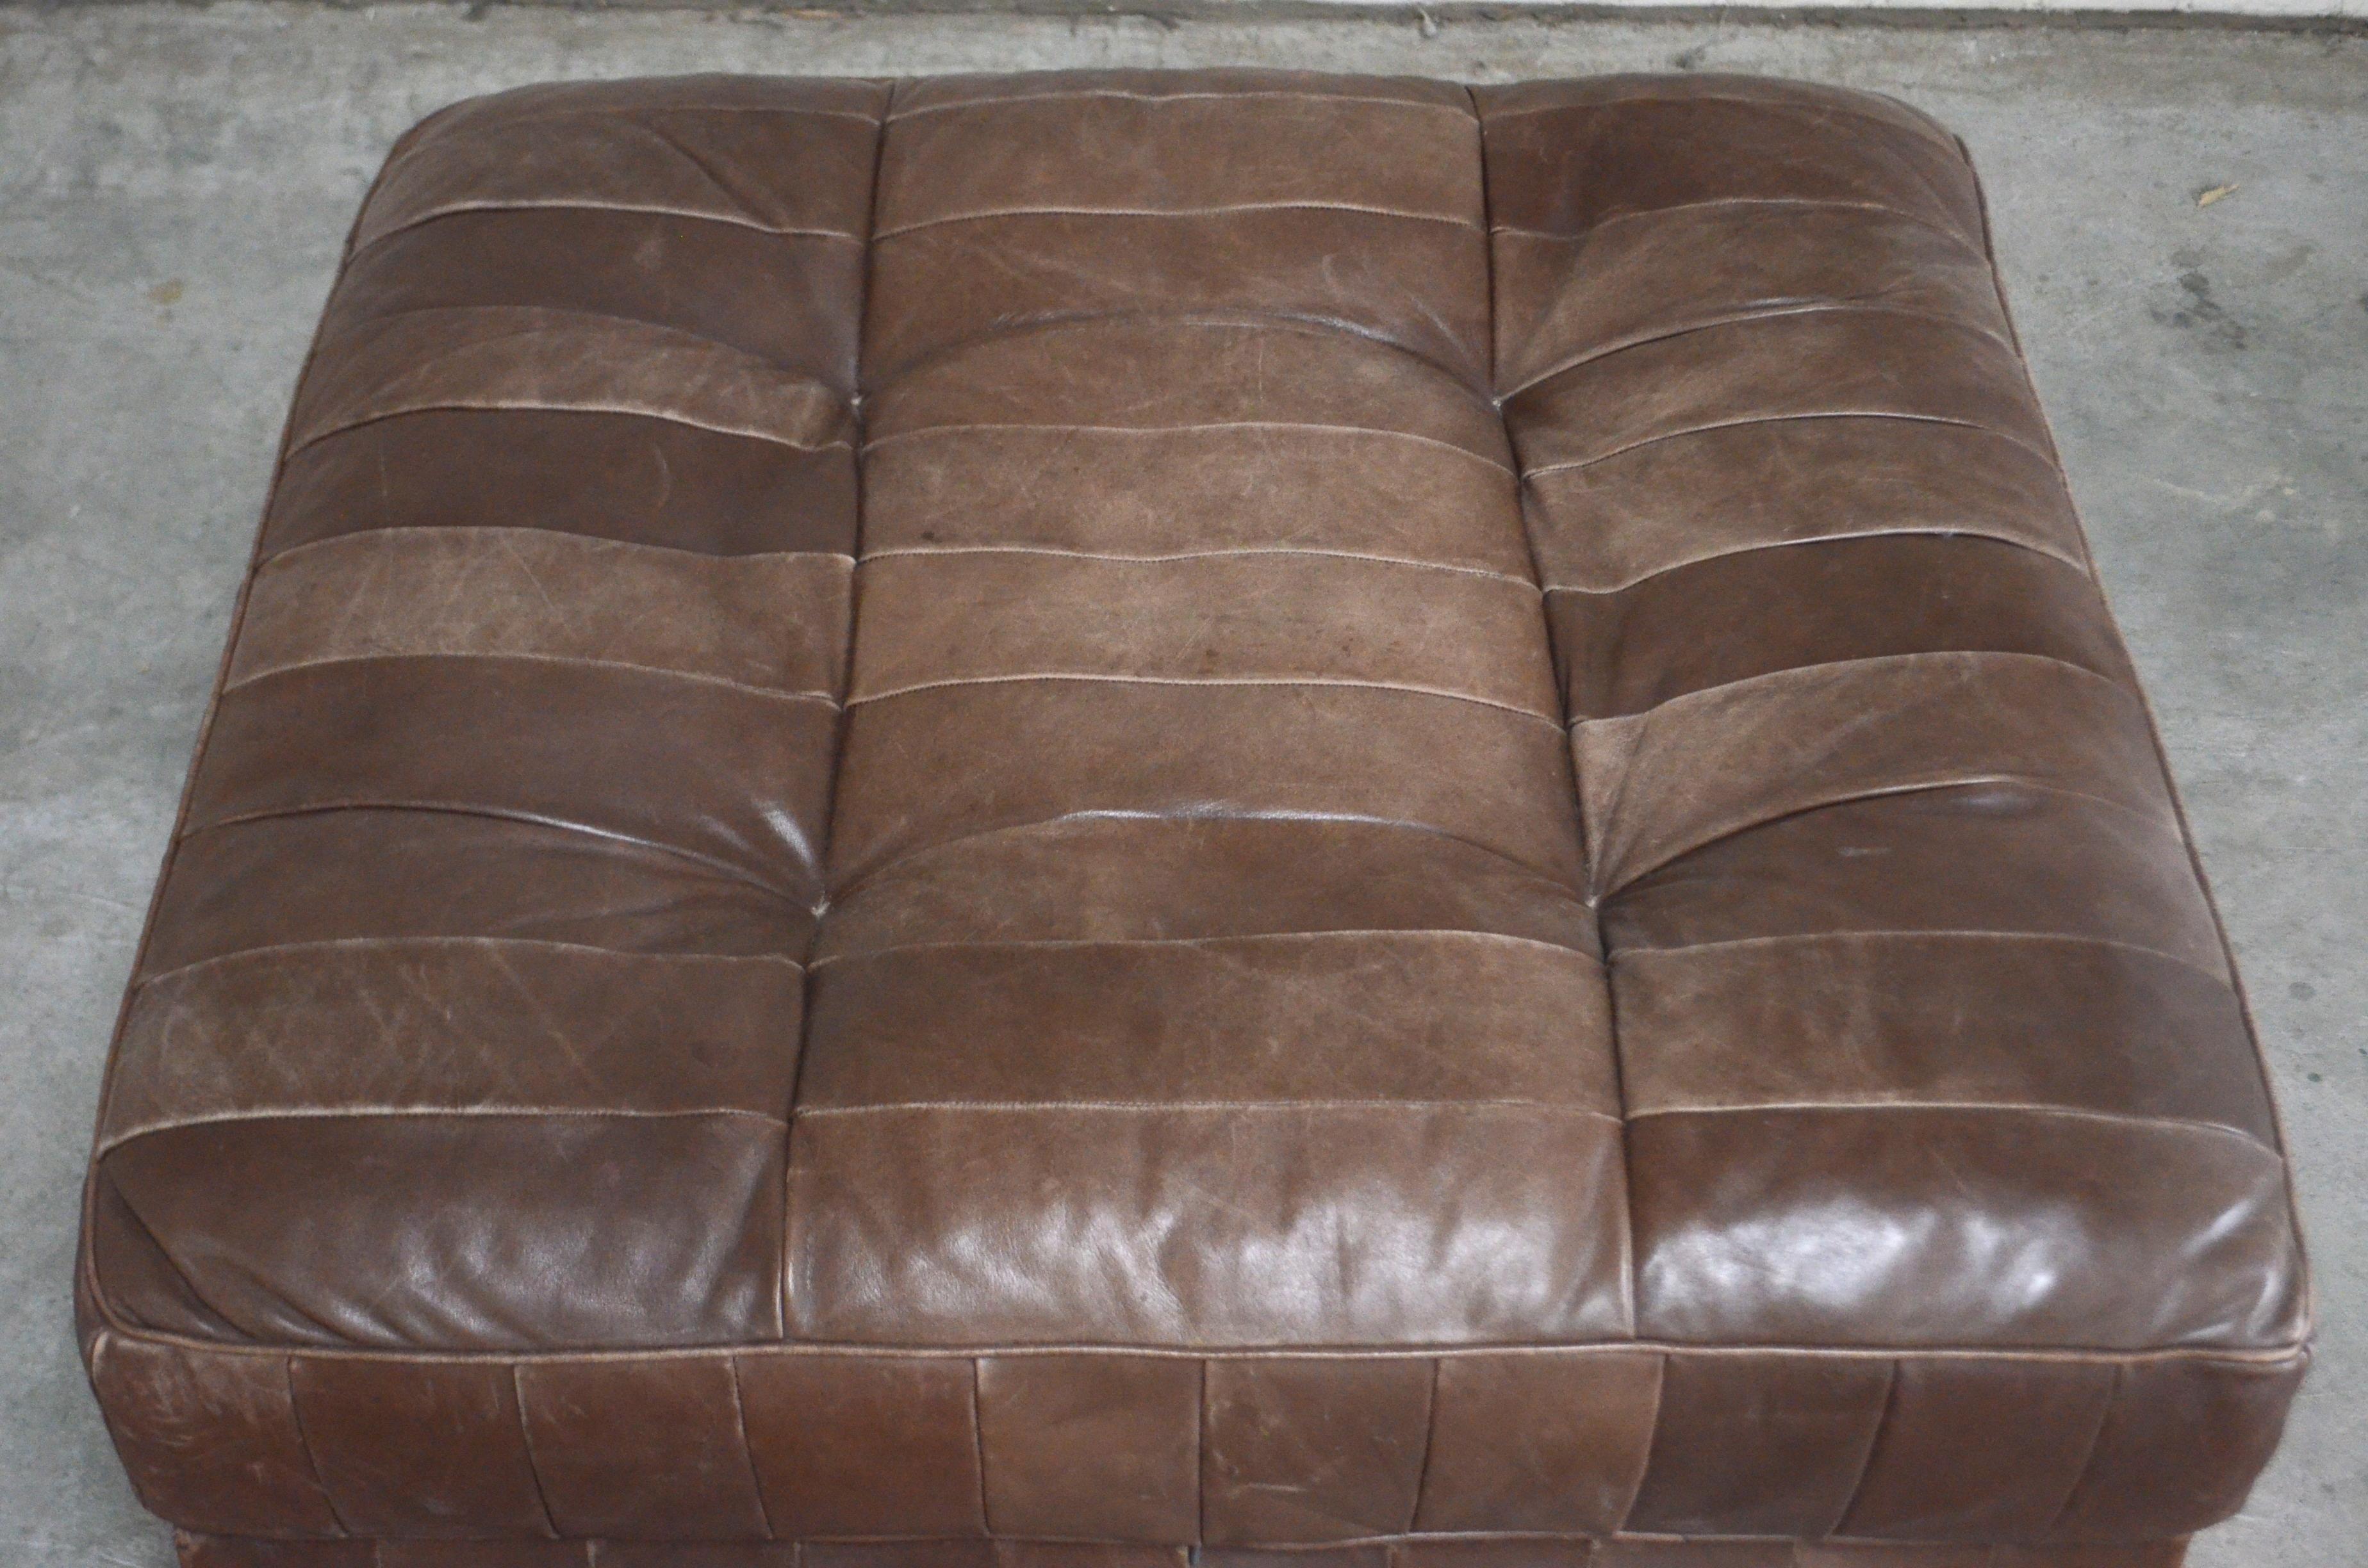 Swiss De Sede DS 88 Leather Ottoman or Pouf Patchwork Brown